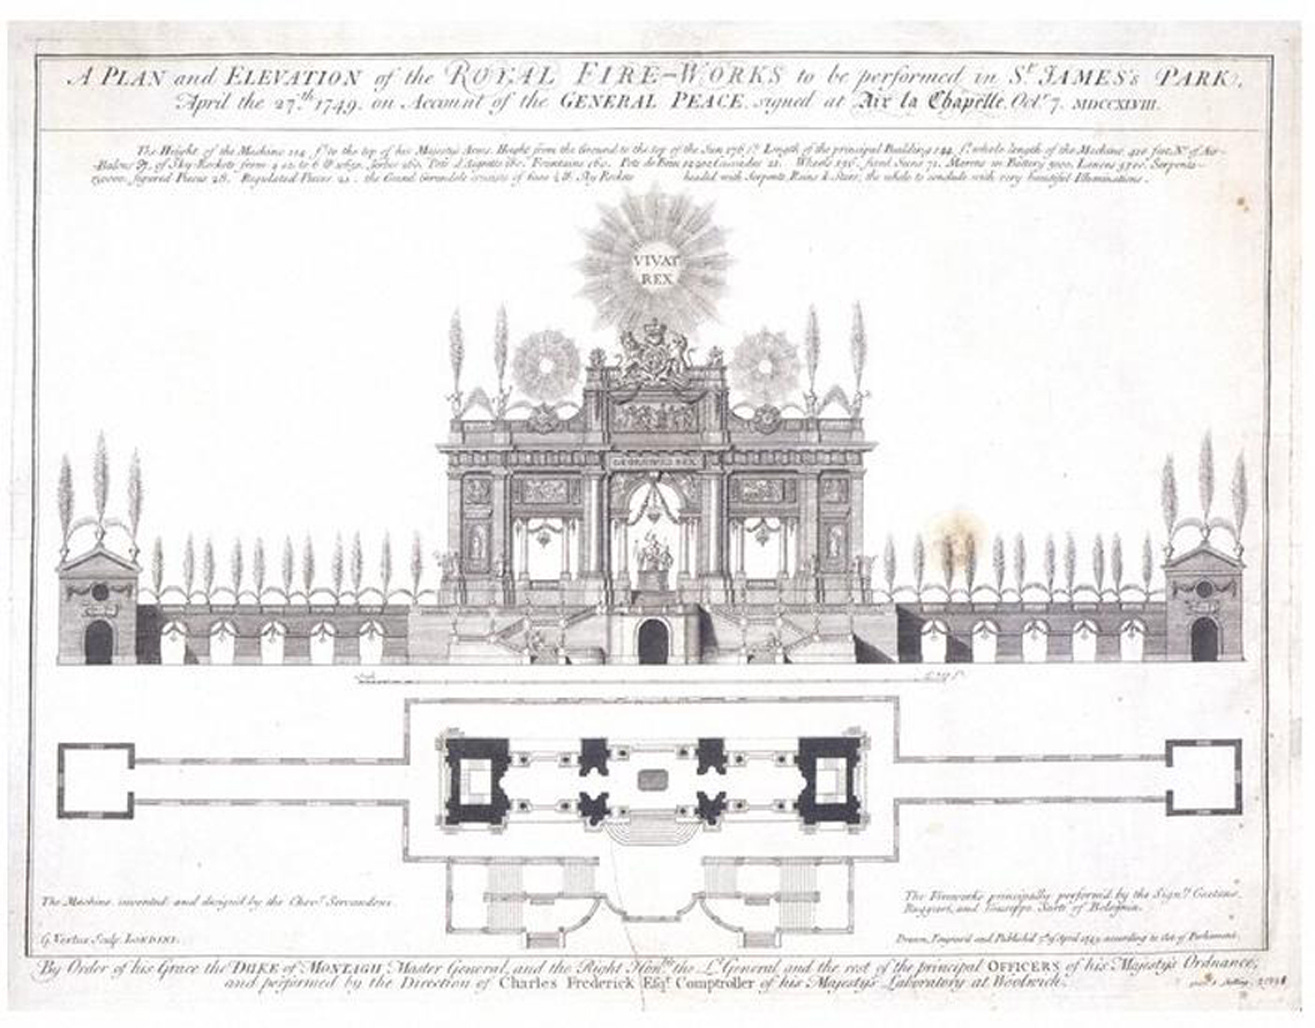 Architectural drawing of the fireworks 'machine' 1749